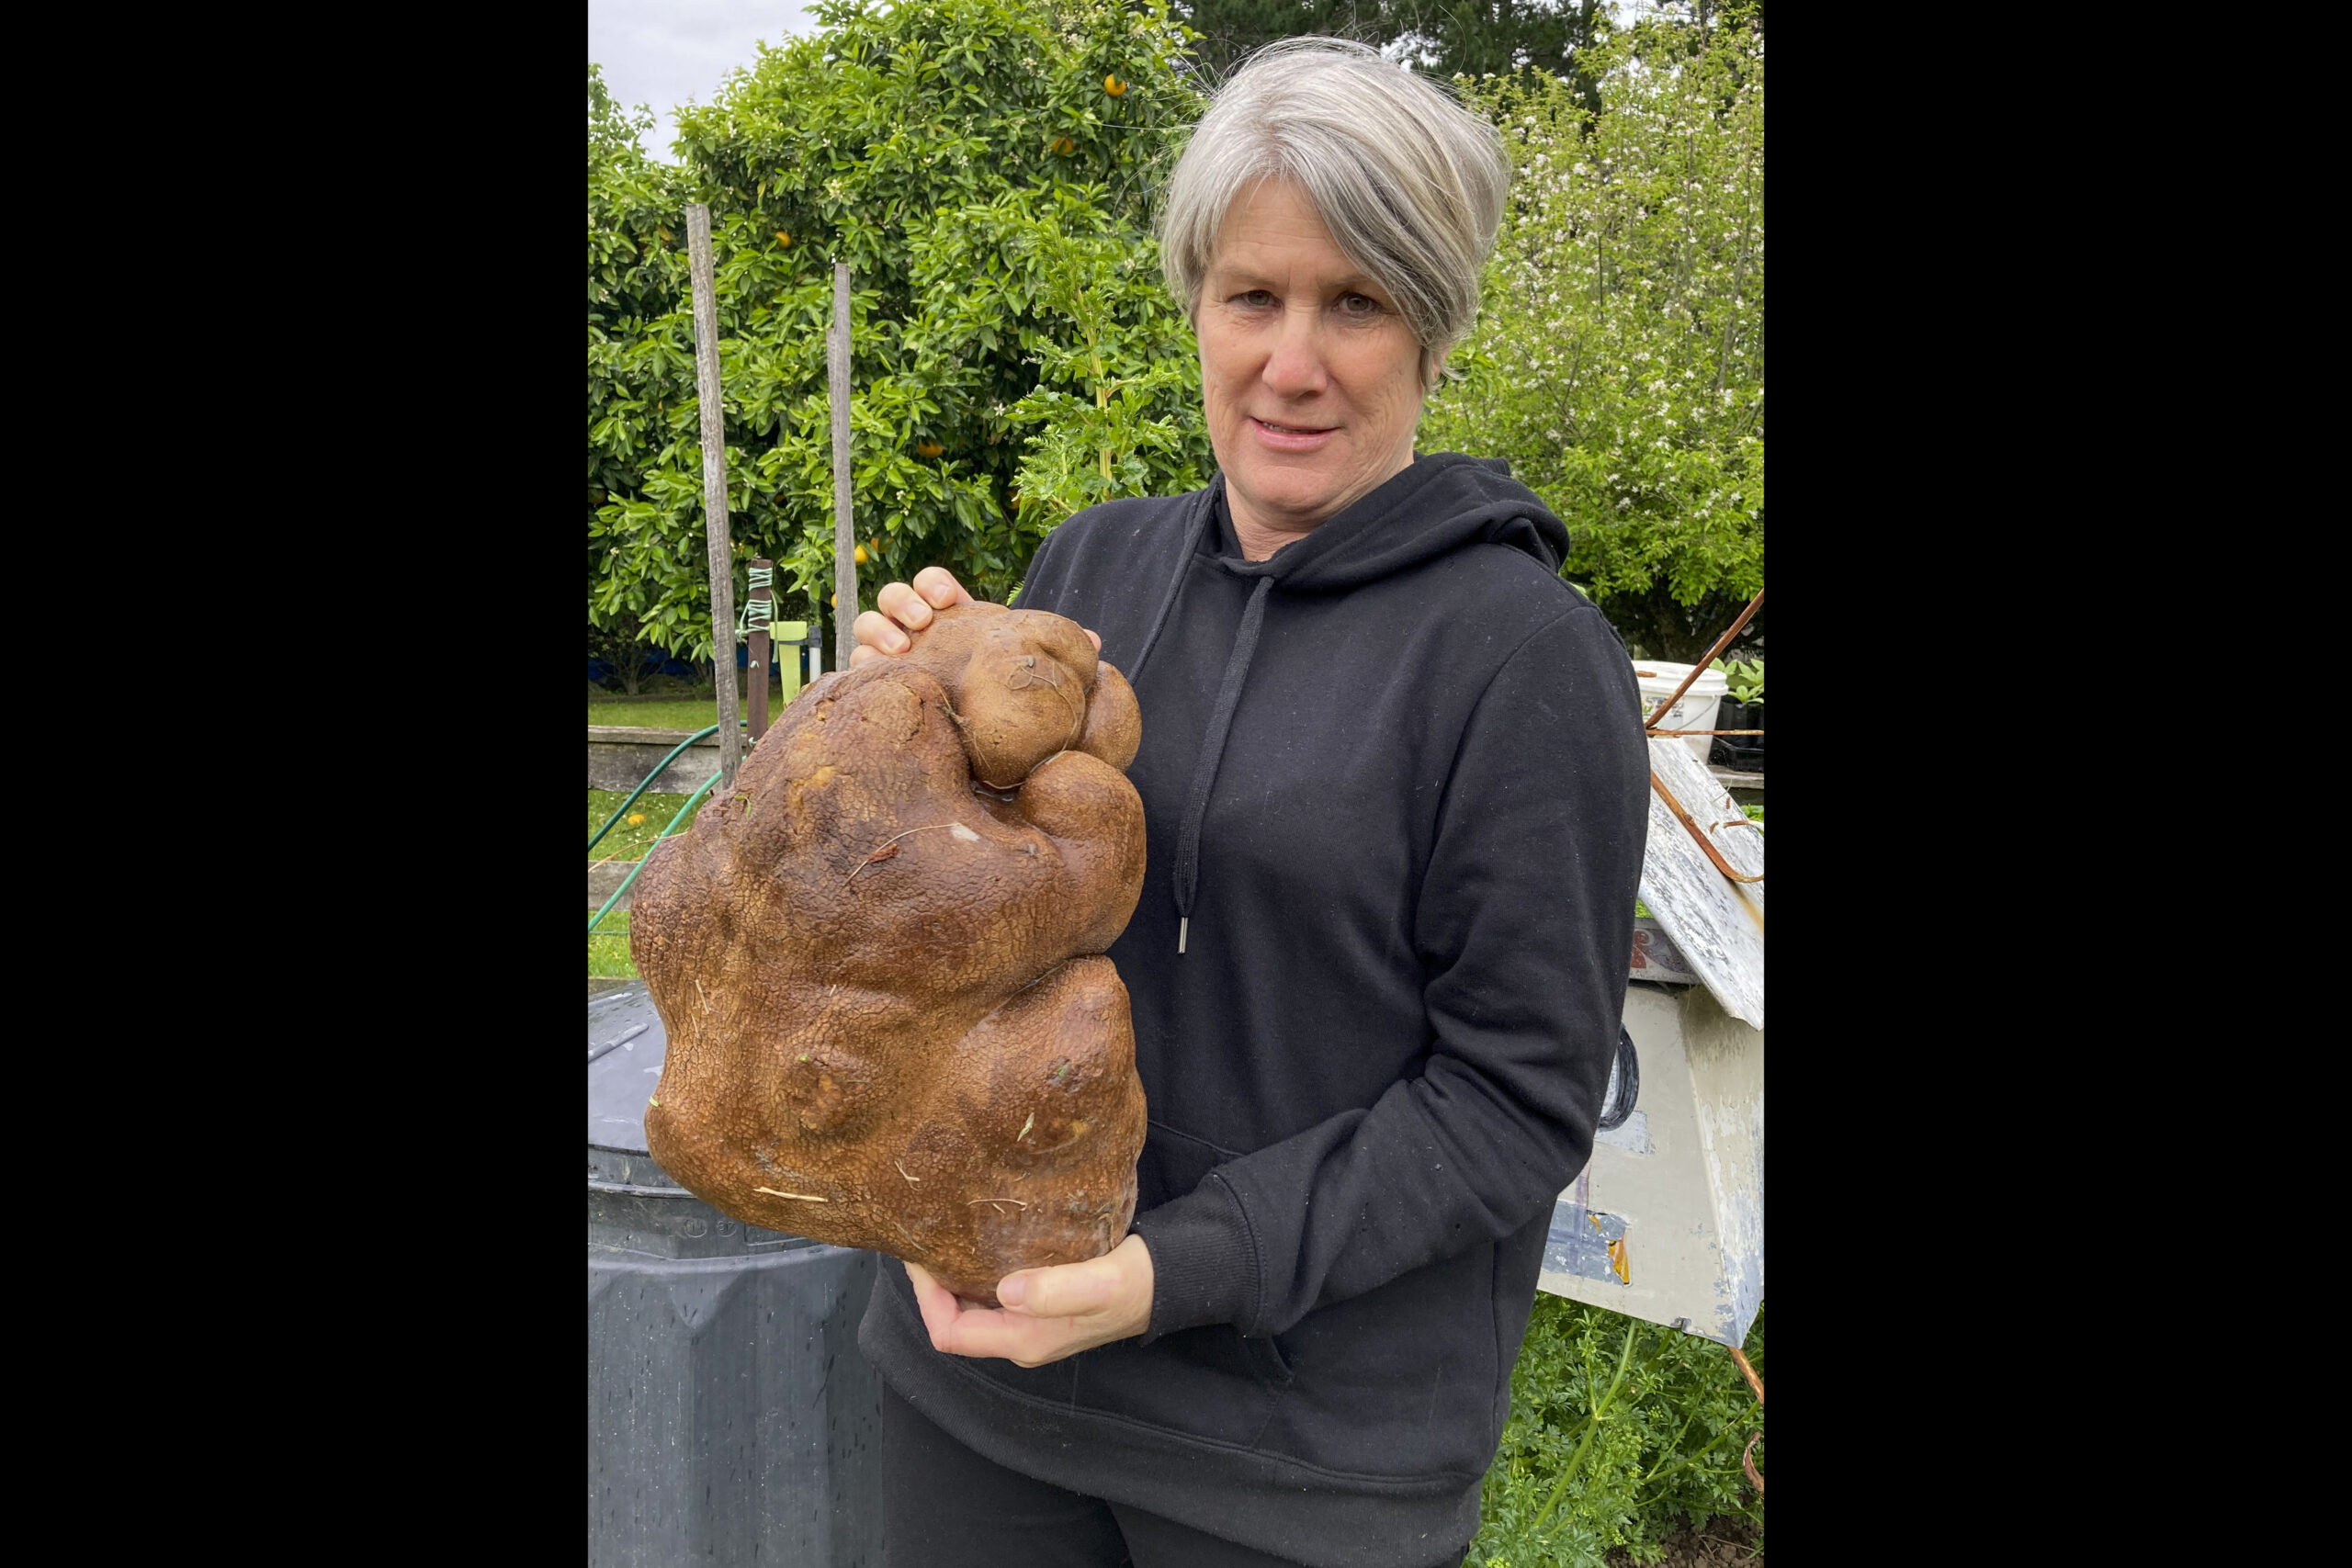 Donna Craig-Brown holds "Doug" what was believed to be the world's largest potato in the garden of her small farm near Hamilton, New Zealand on Nov. 3, 2021. Donna and her husband Craig have had their dreams turned to mash after Guinness wrote to say that scientific testing had shown it wasn't, in fact, a potato after all, but a tuber of a type of gourd. (Colin Craig-Brown via AP)